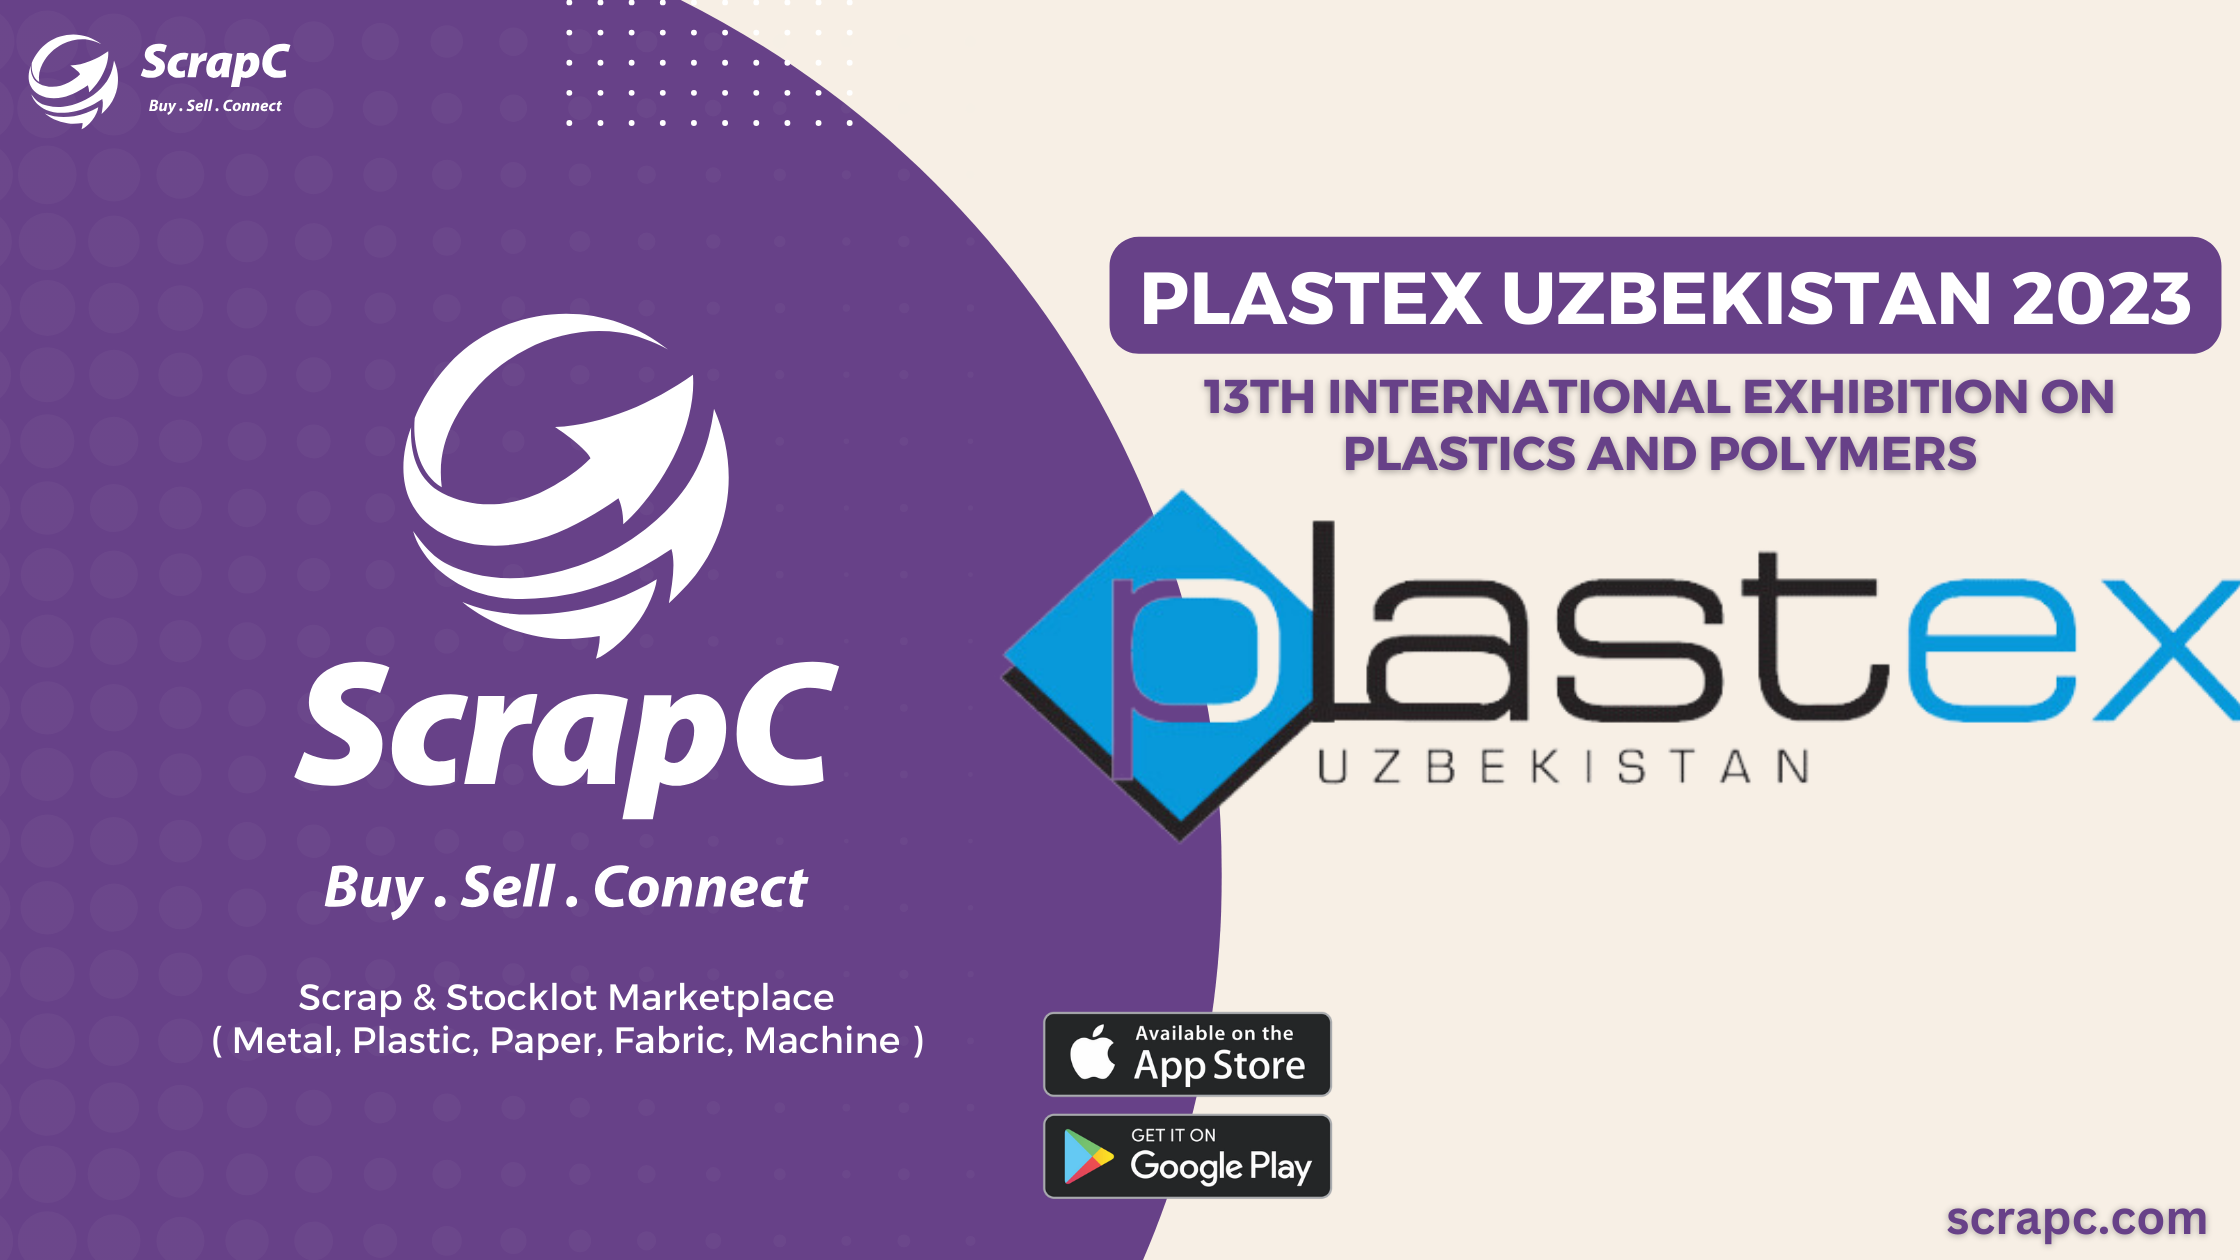 A bustling exhibition hall filled with colorful plastic products and machinery at Plastex Uzbekistan 2023.